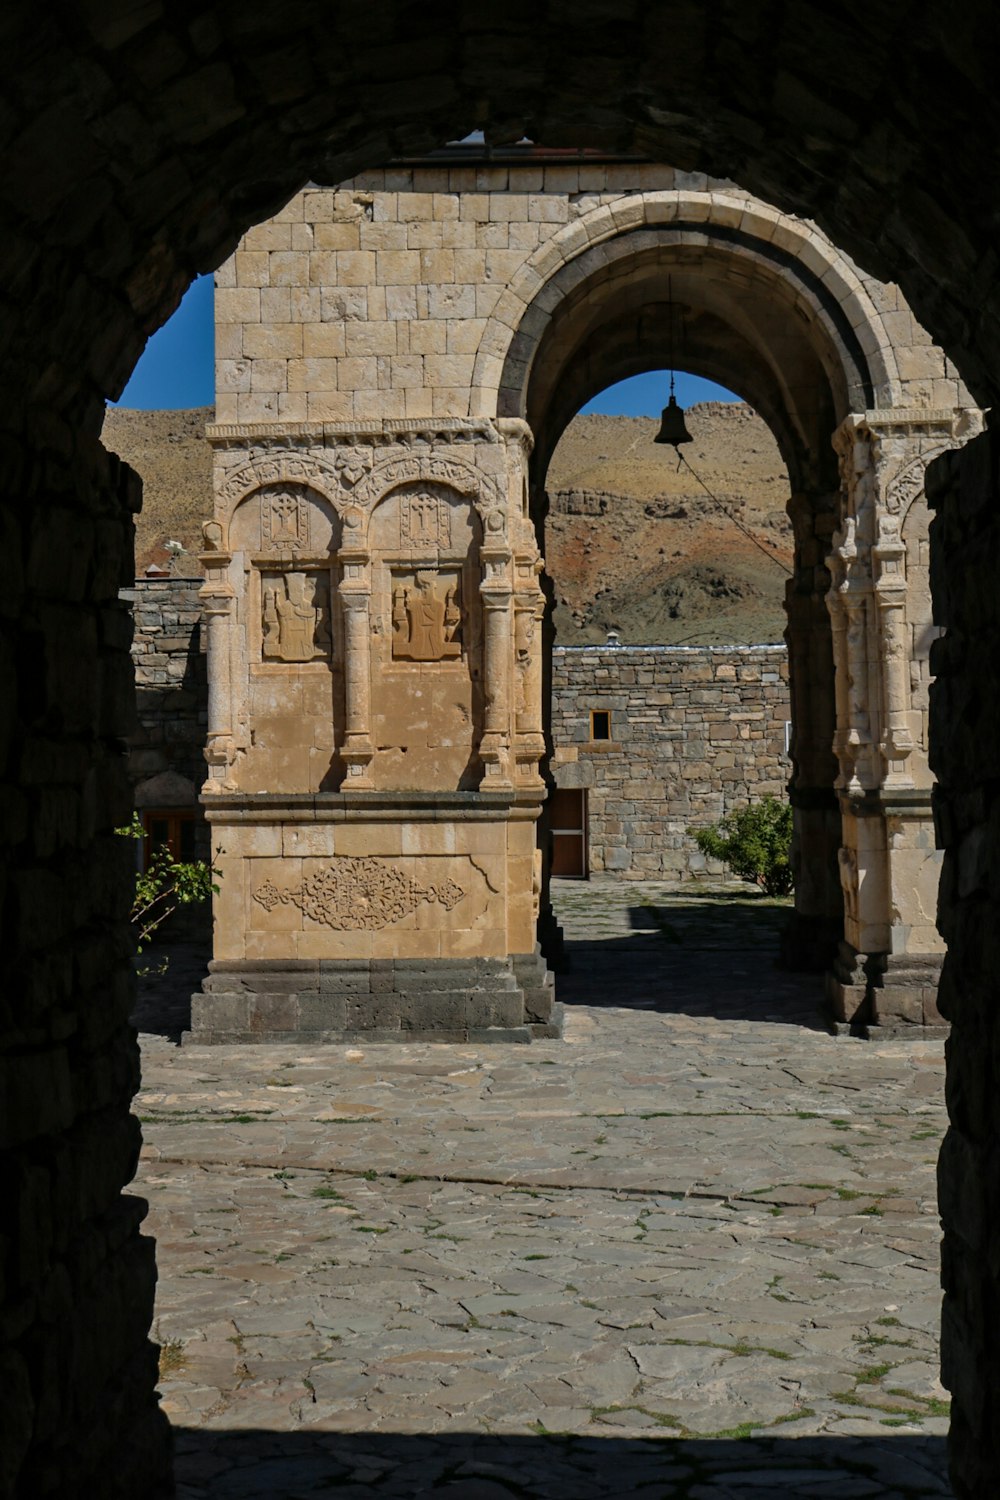 an arch in a stone building with a clock on it